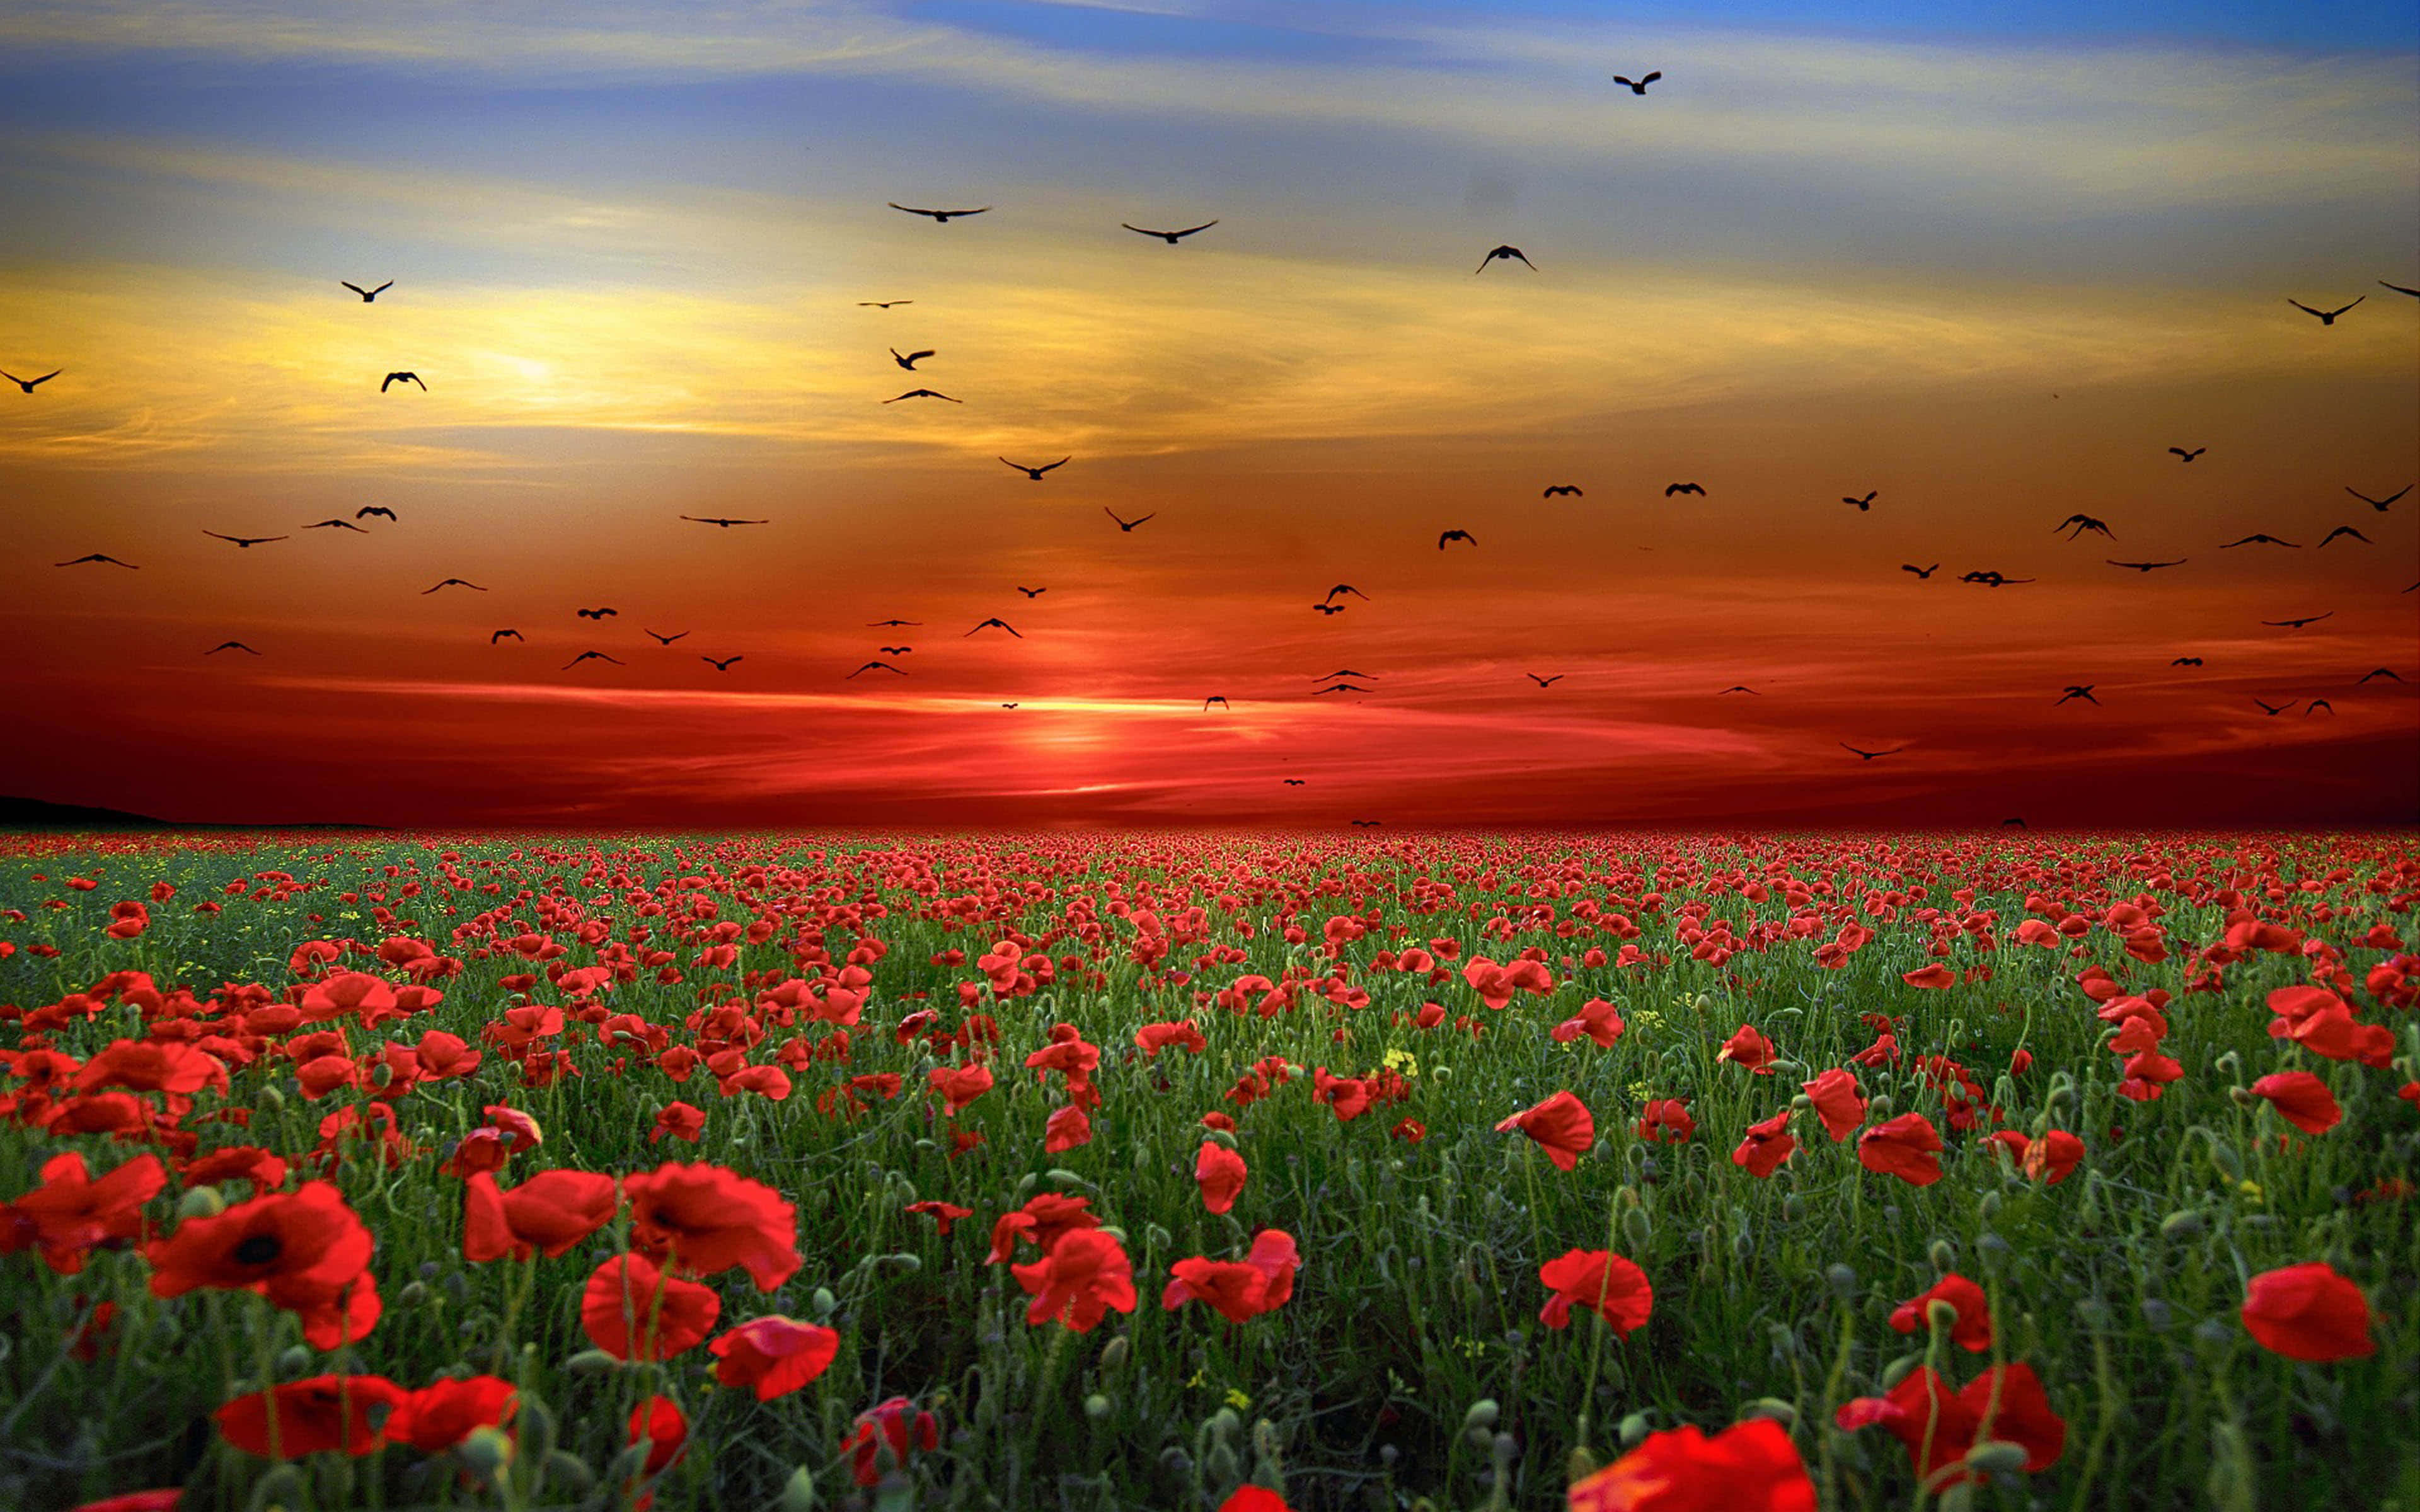 A Sea Of Flowers In Vibrant Hues Under A Majestic Sky. Wallpaper